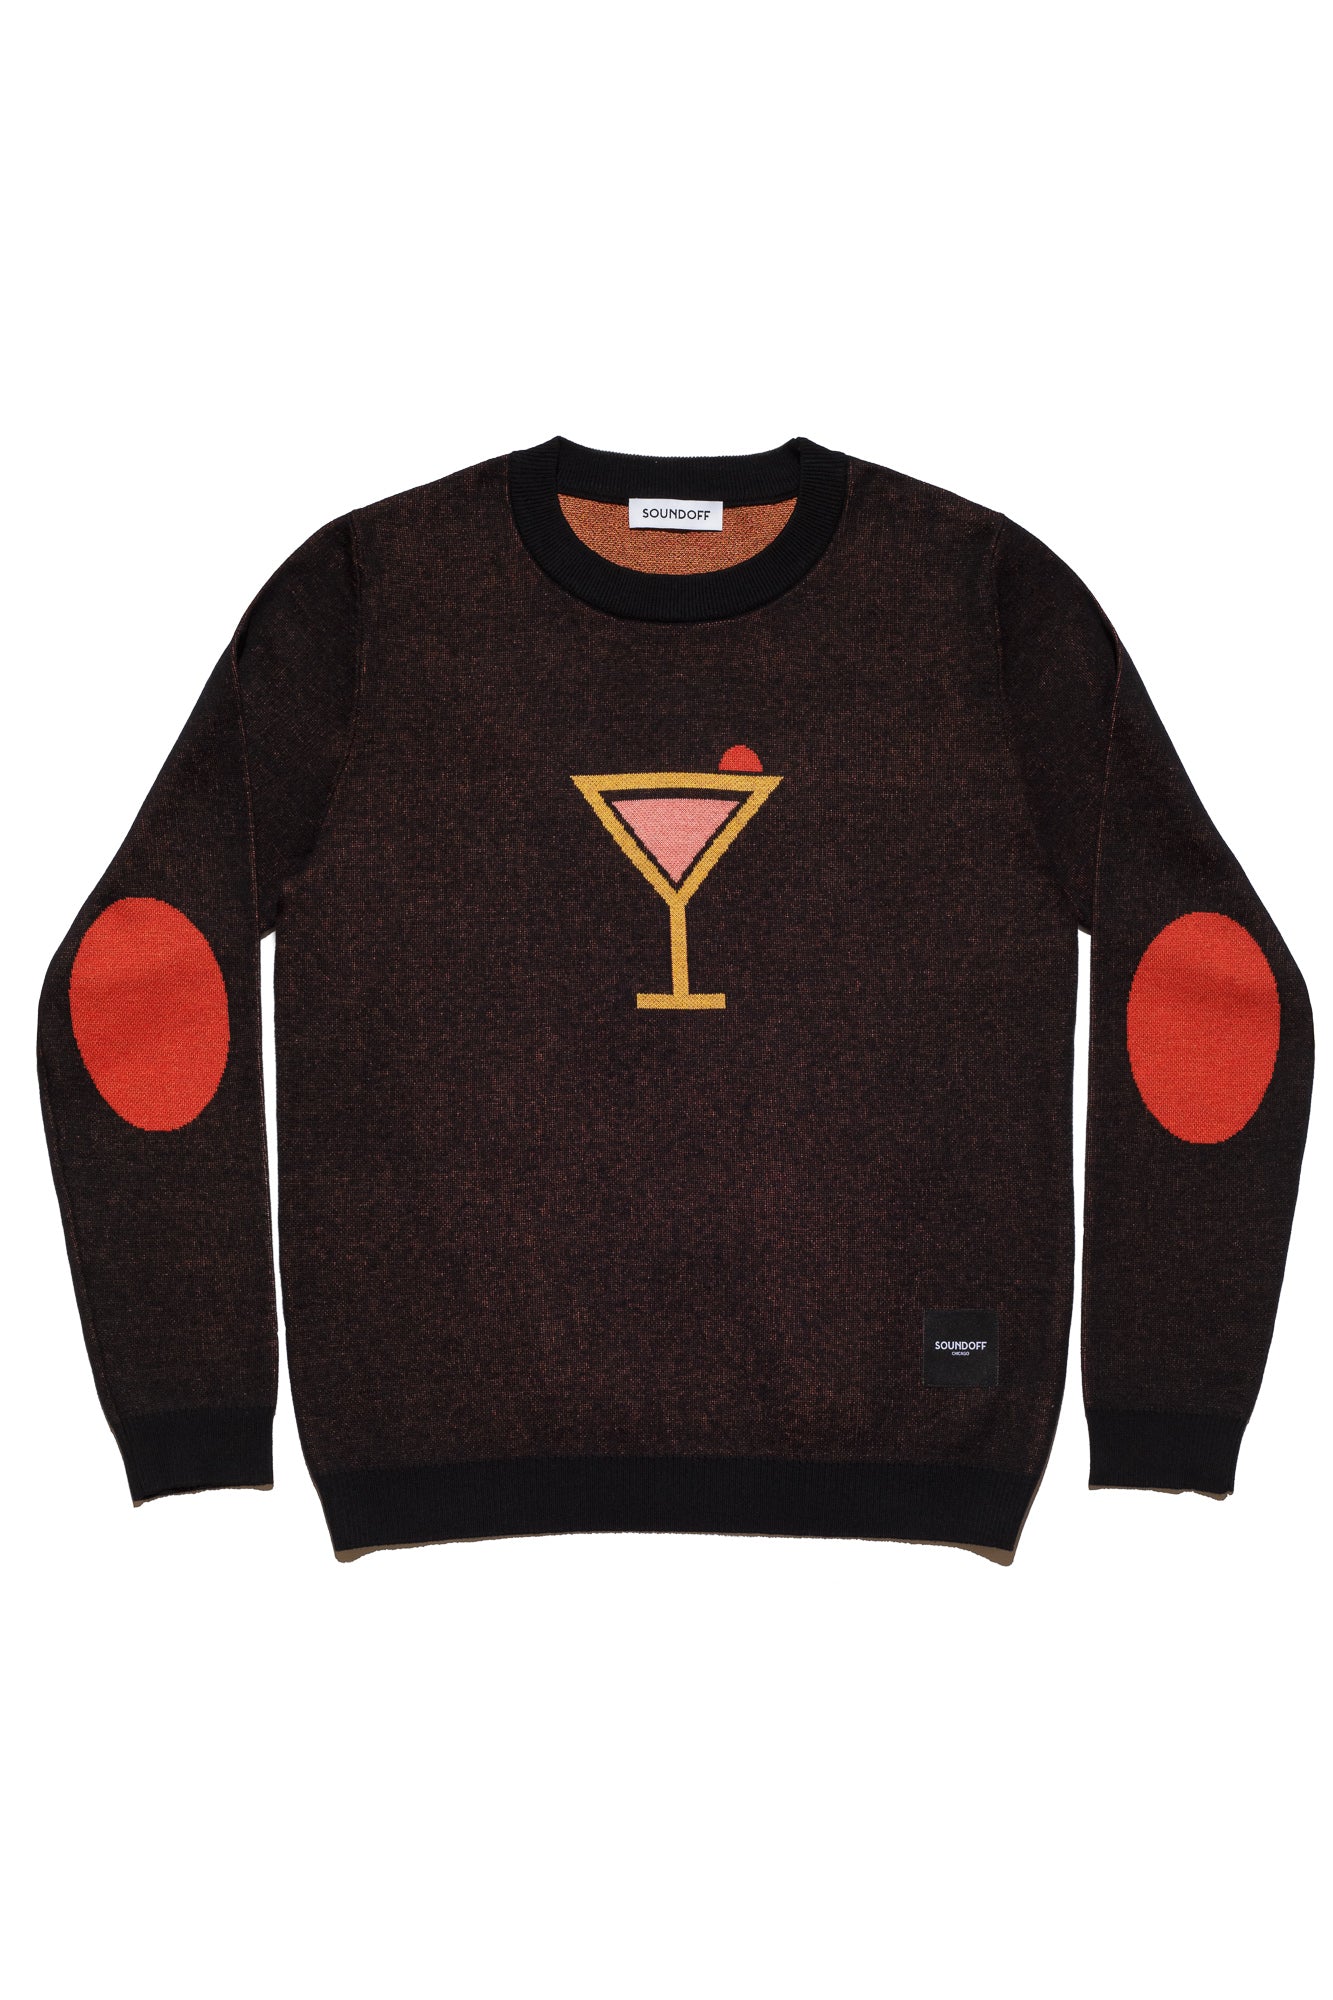 MARTINI KNIT CREW; MADE TO ORDER